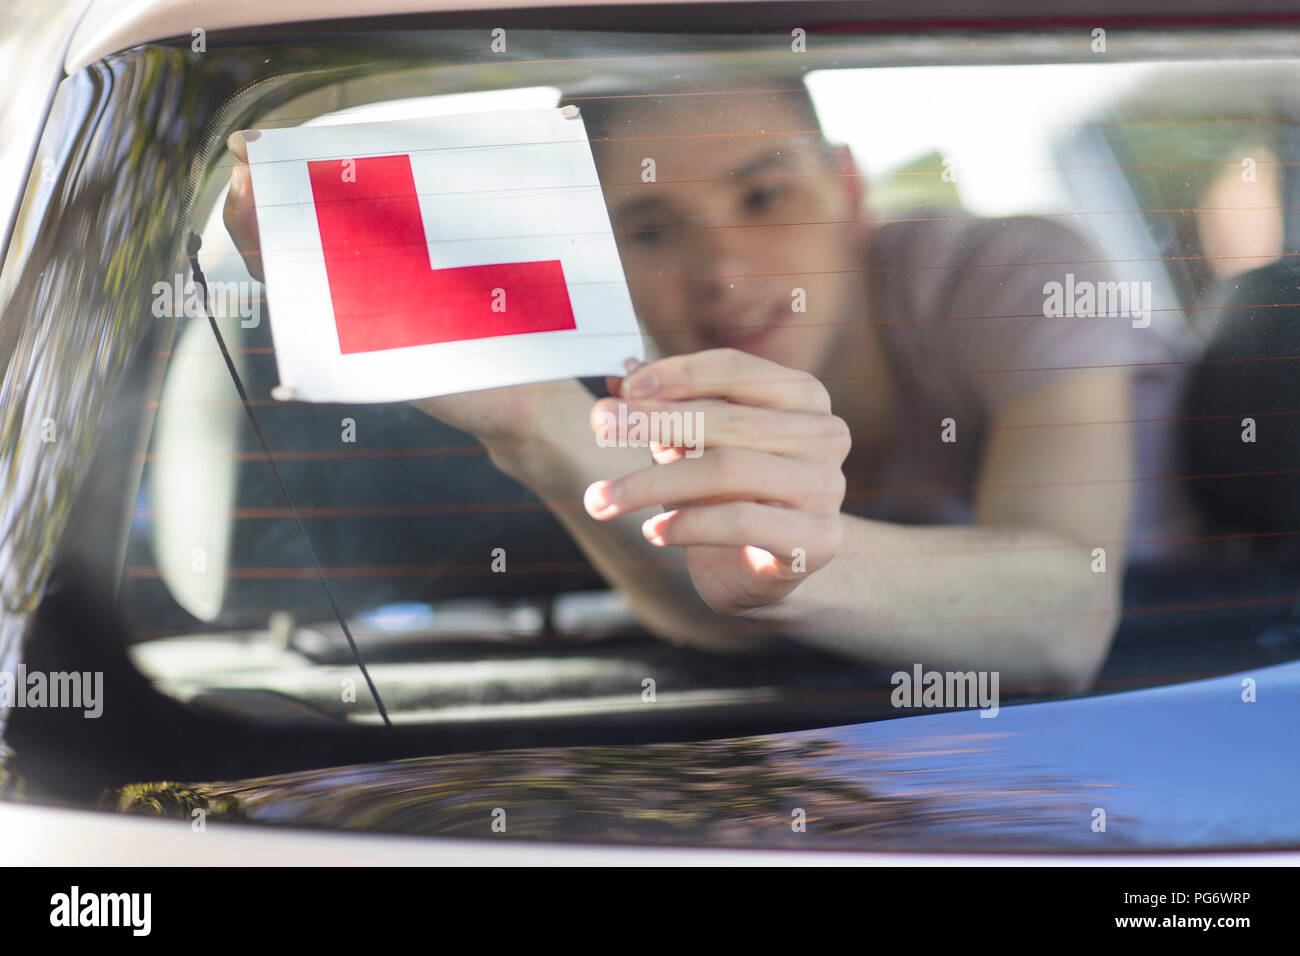 Learner driver placing letter L on rear window of car Stock Photo